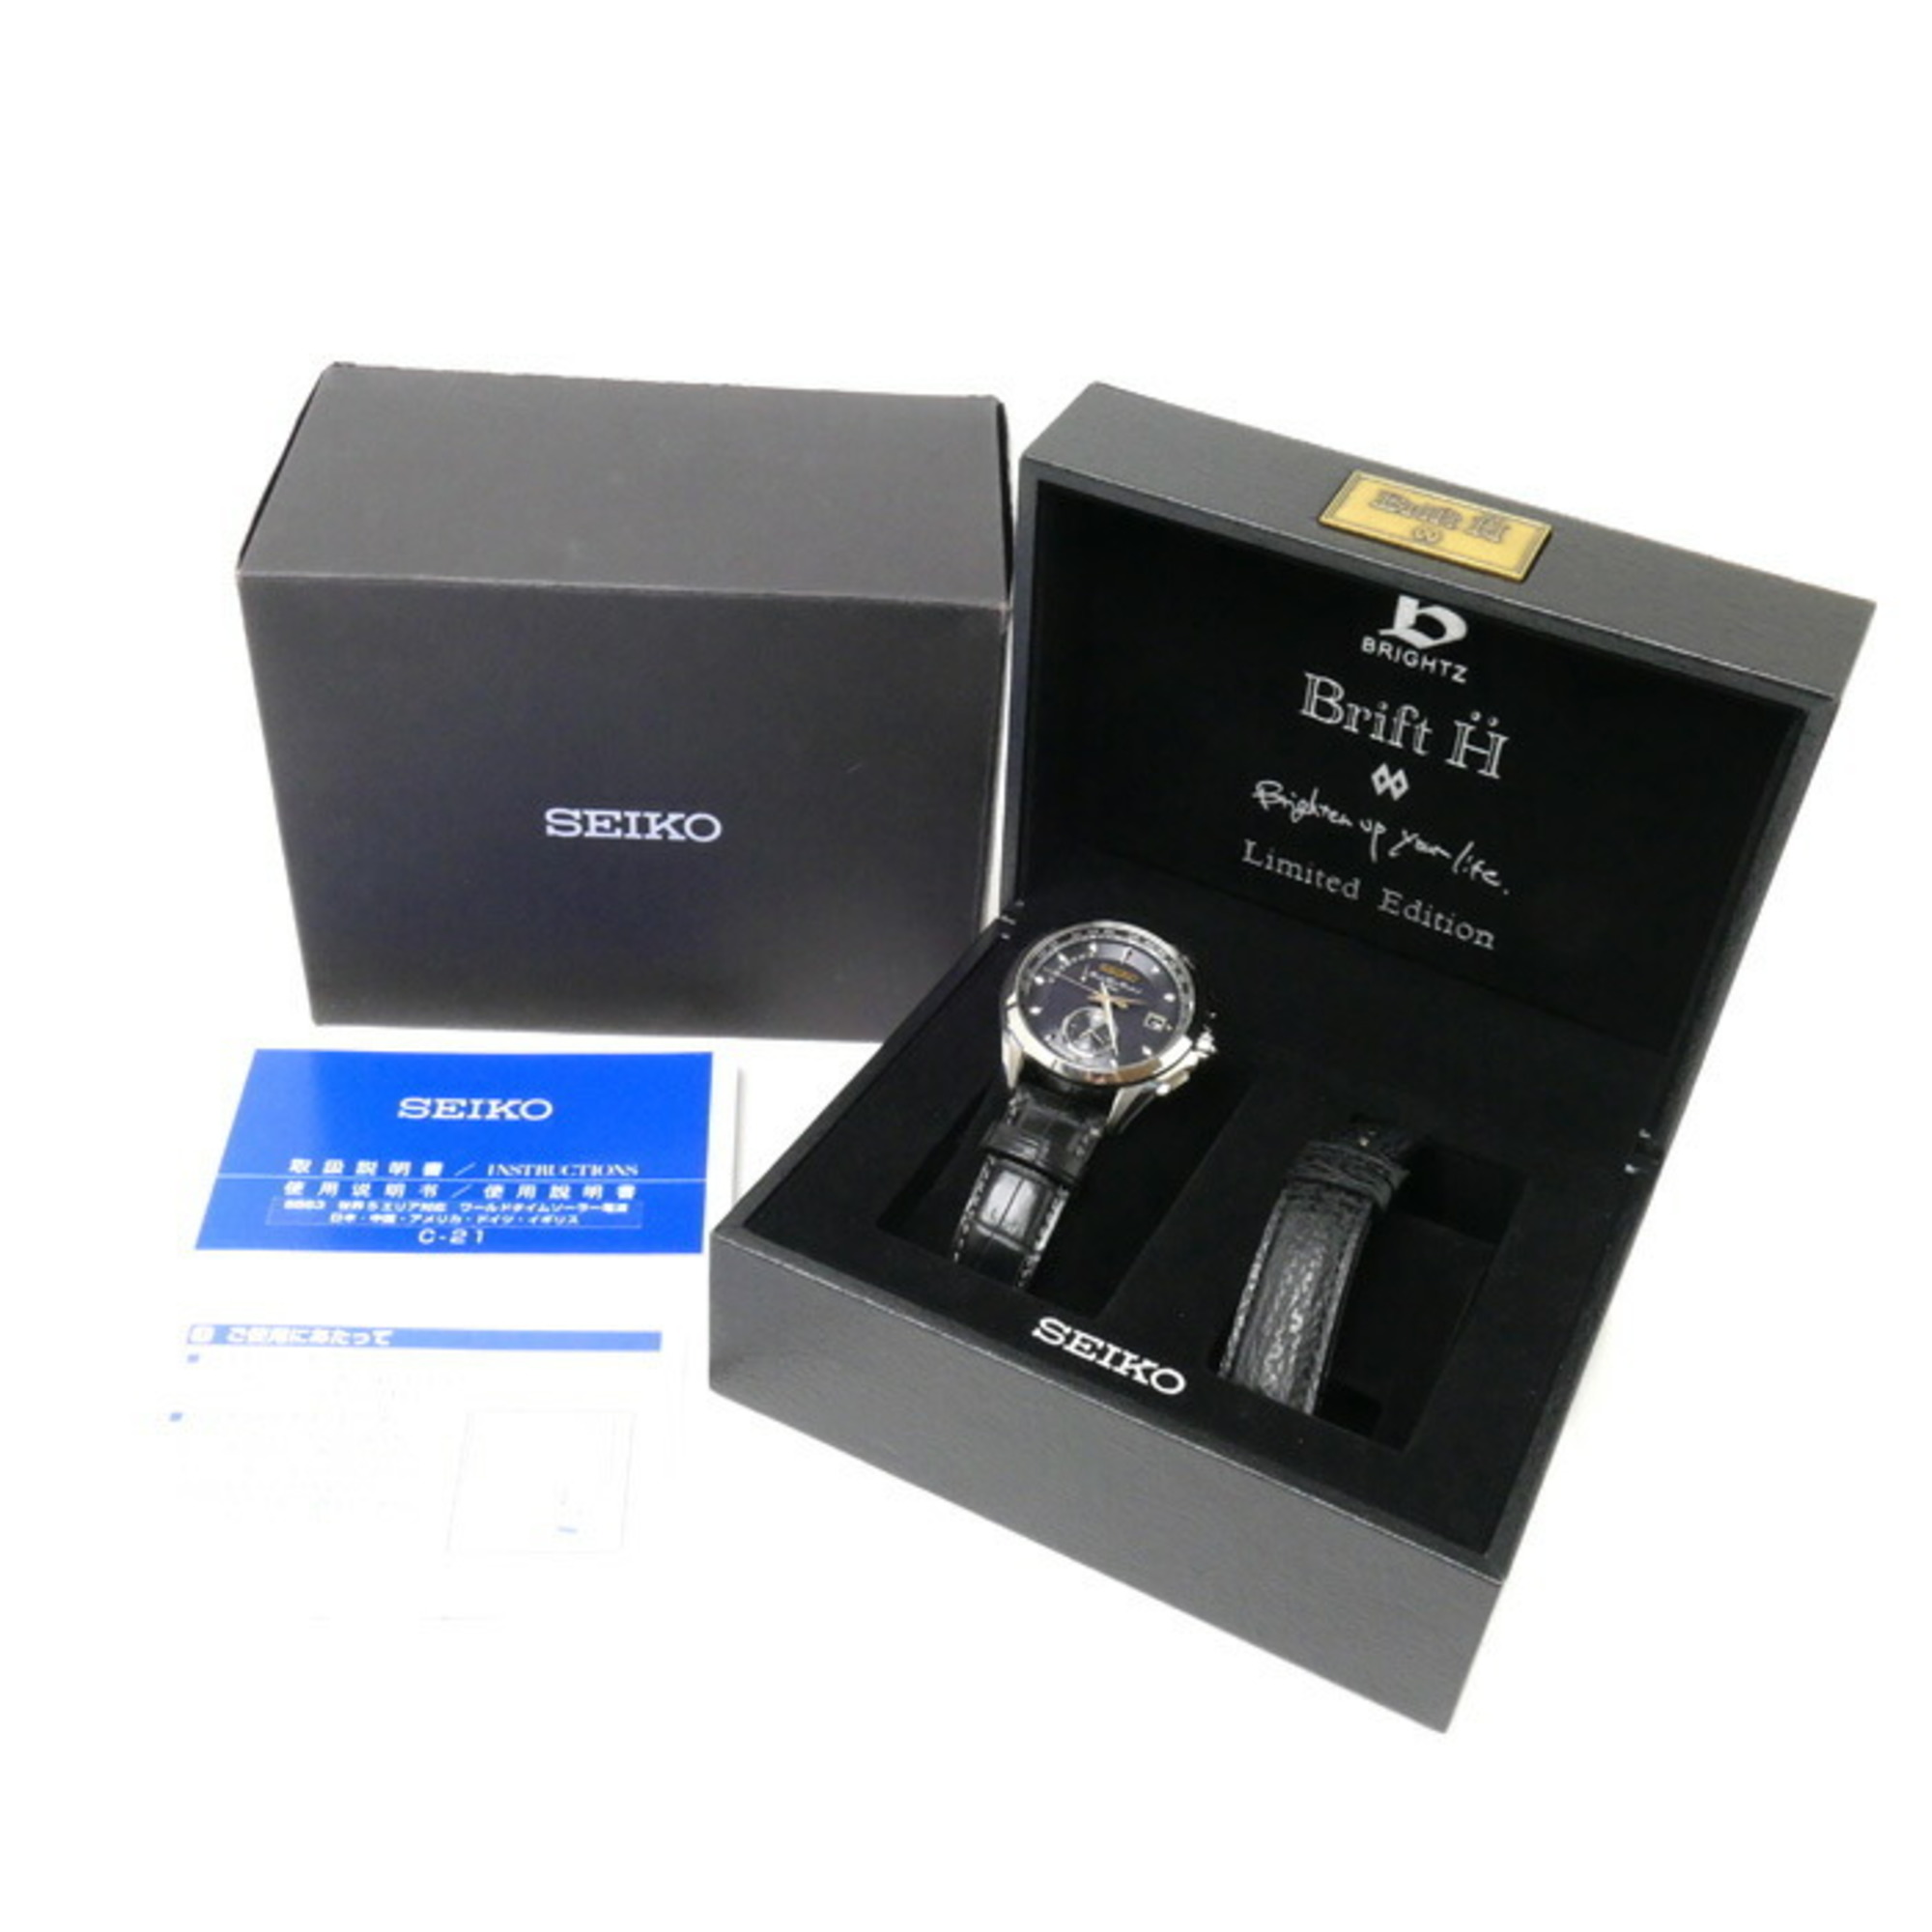 SEIKO BRIGHTZ Brift H collaboration model limited to 700 watches battery operated SAGA245/8B63-0AF0